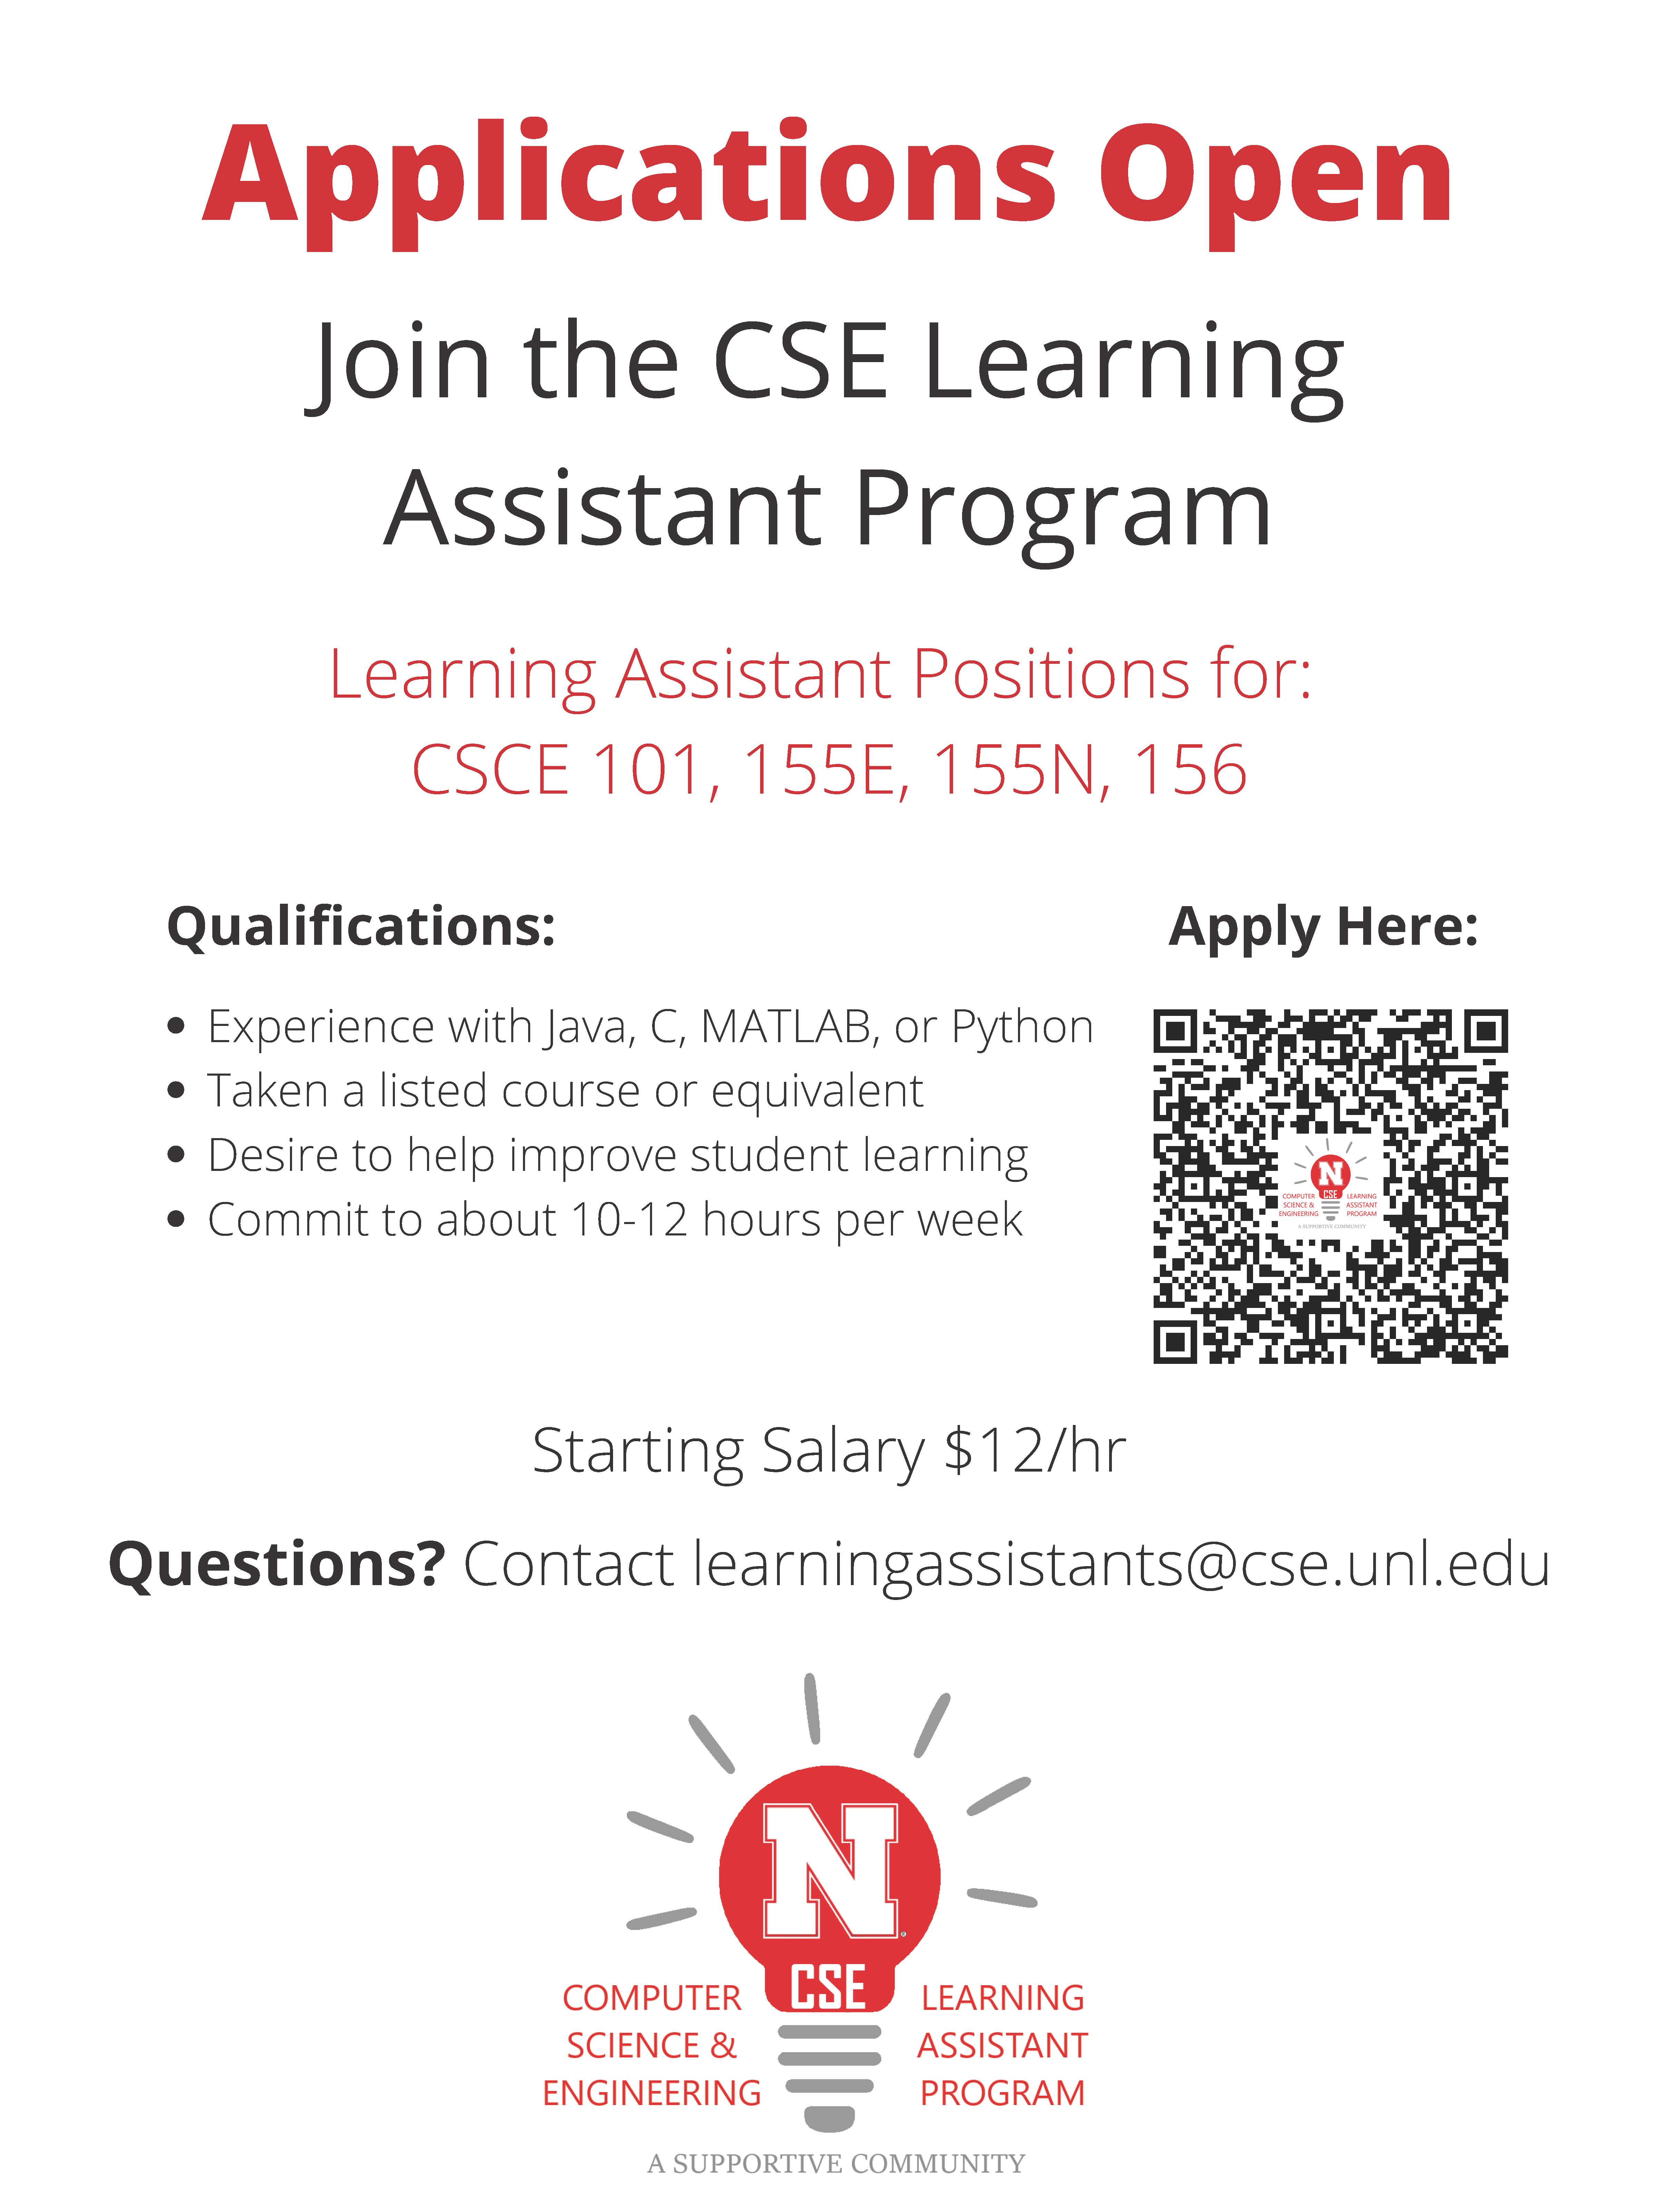 The CSE Learning Assistant Program is now accepting applications.